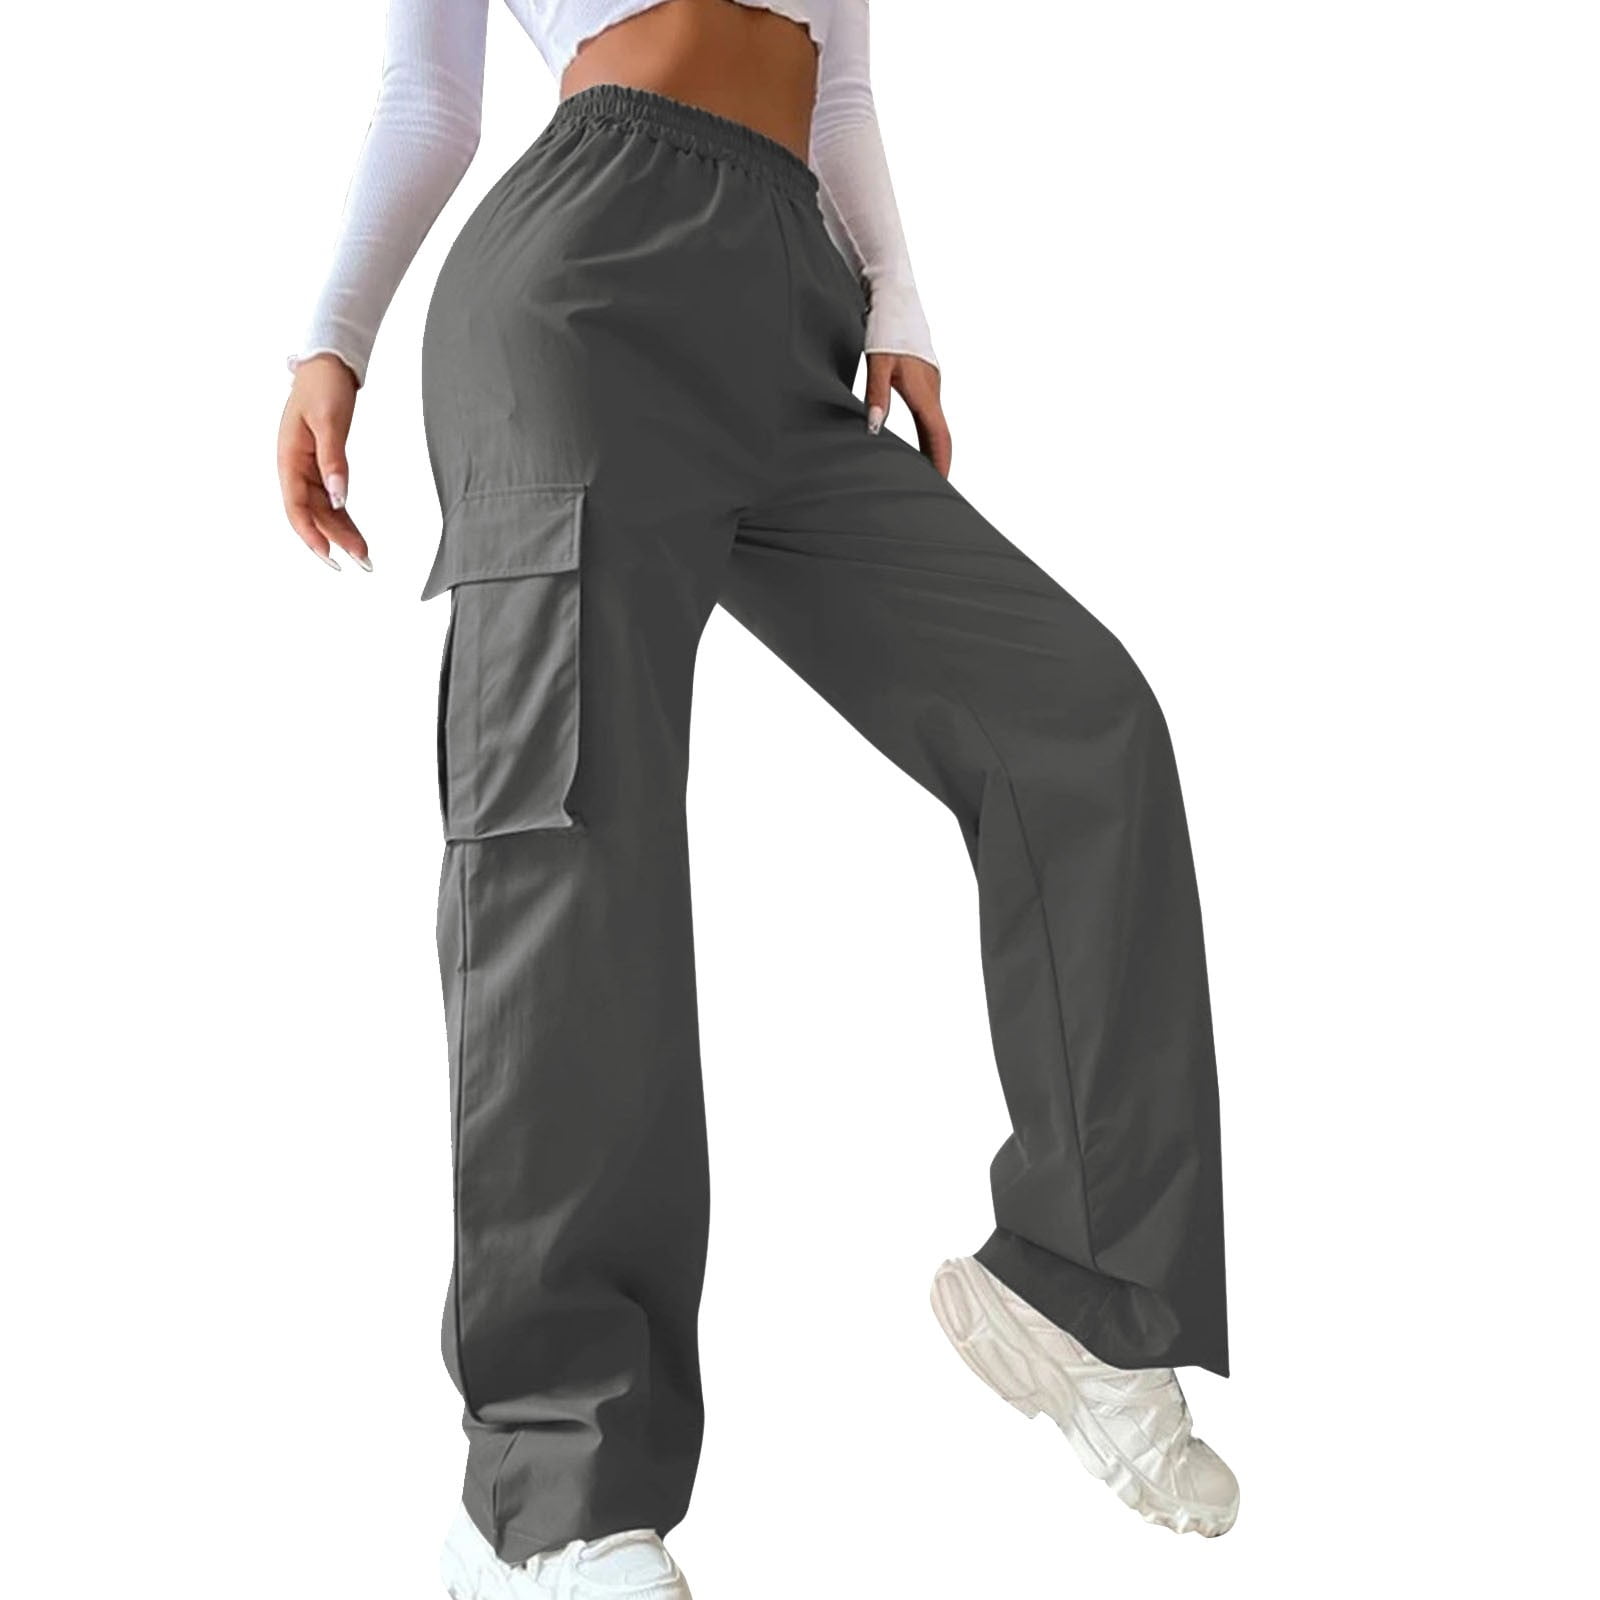 Buy Women Straight Trouser Gray Solid Cotton for Best Price, Reviews, Free  Shipping